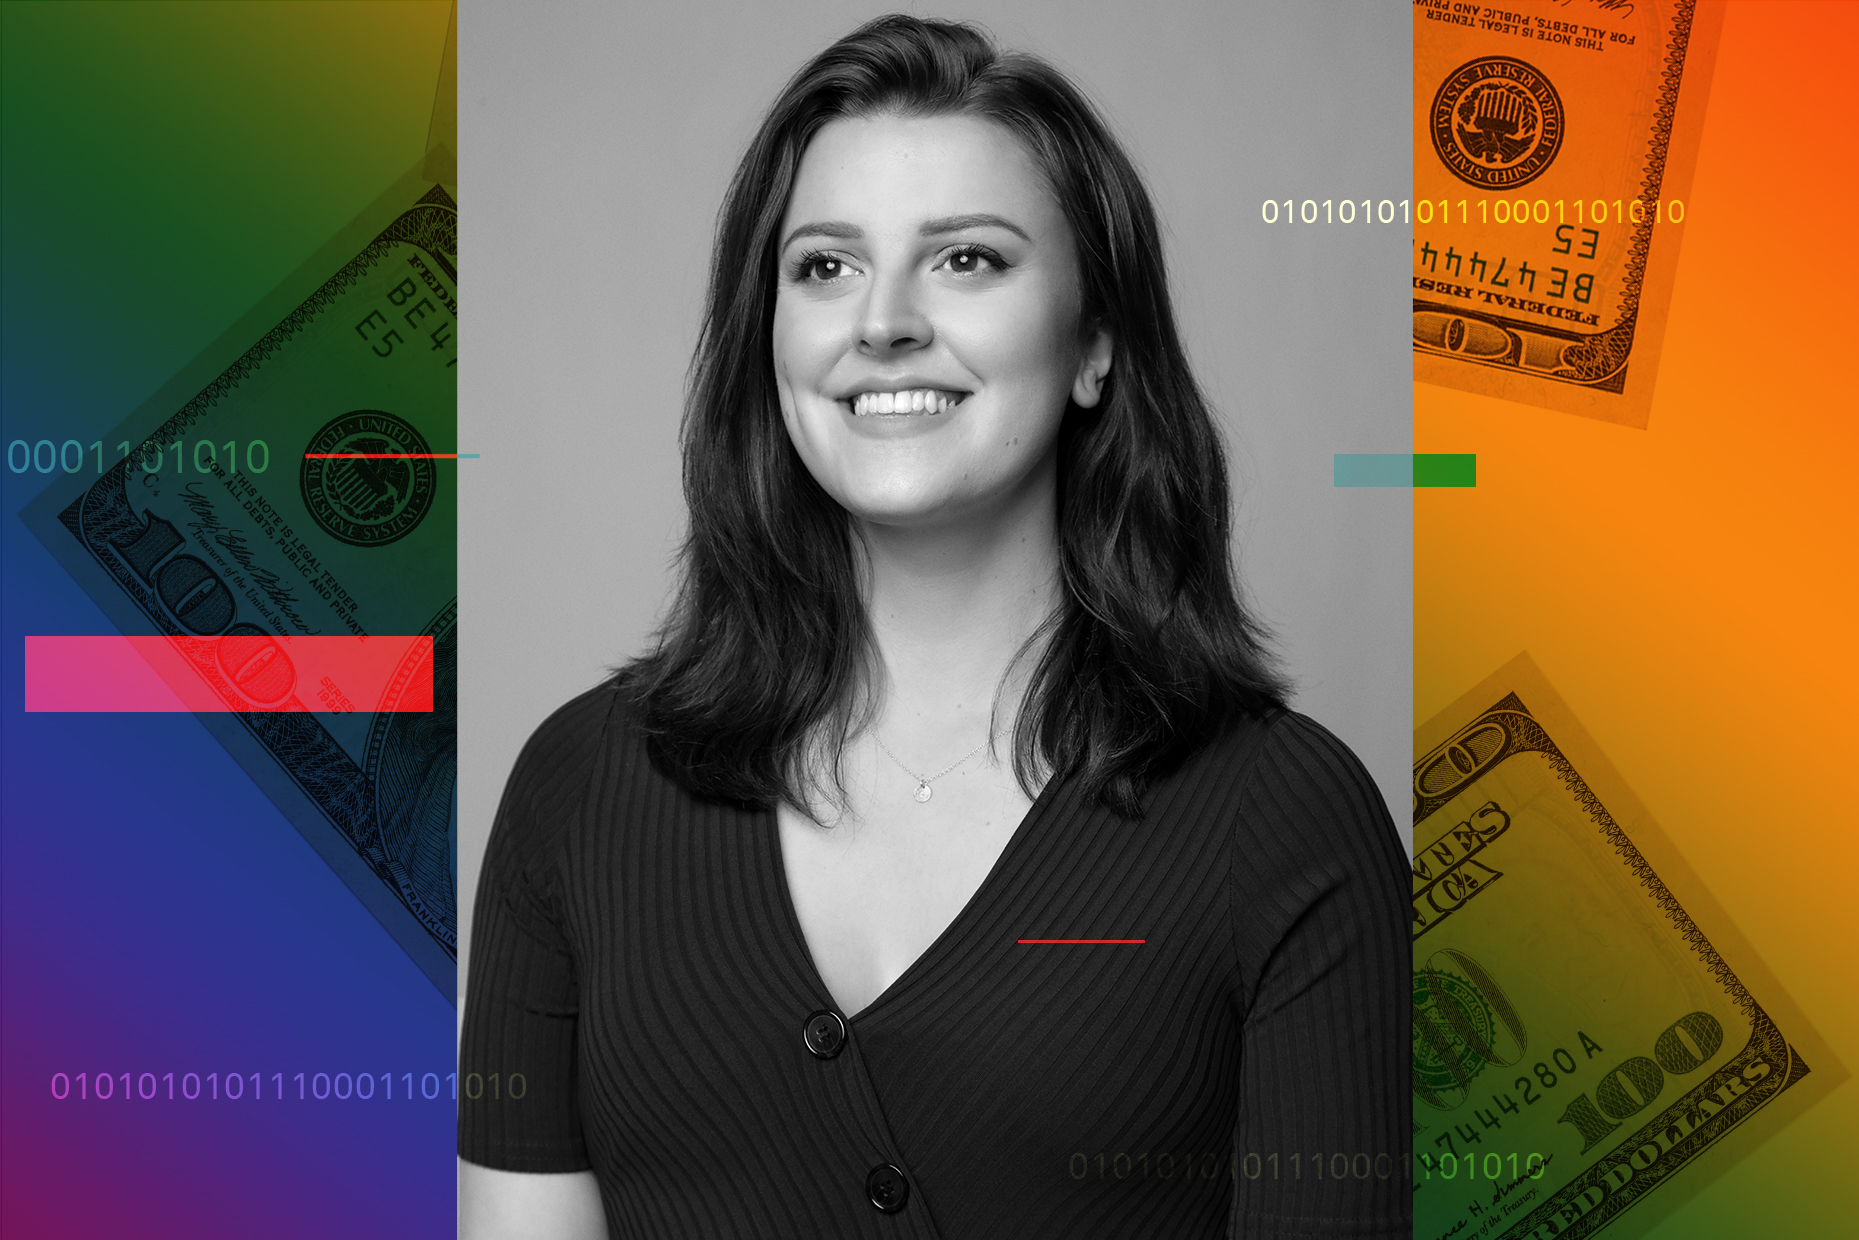 Photograph of Billie Simmons over a rainbow colored background and hundred dollar bills